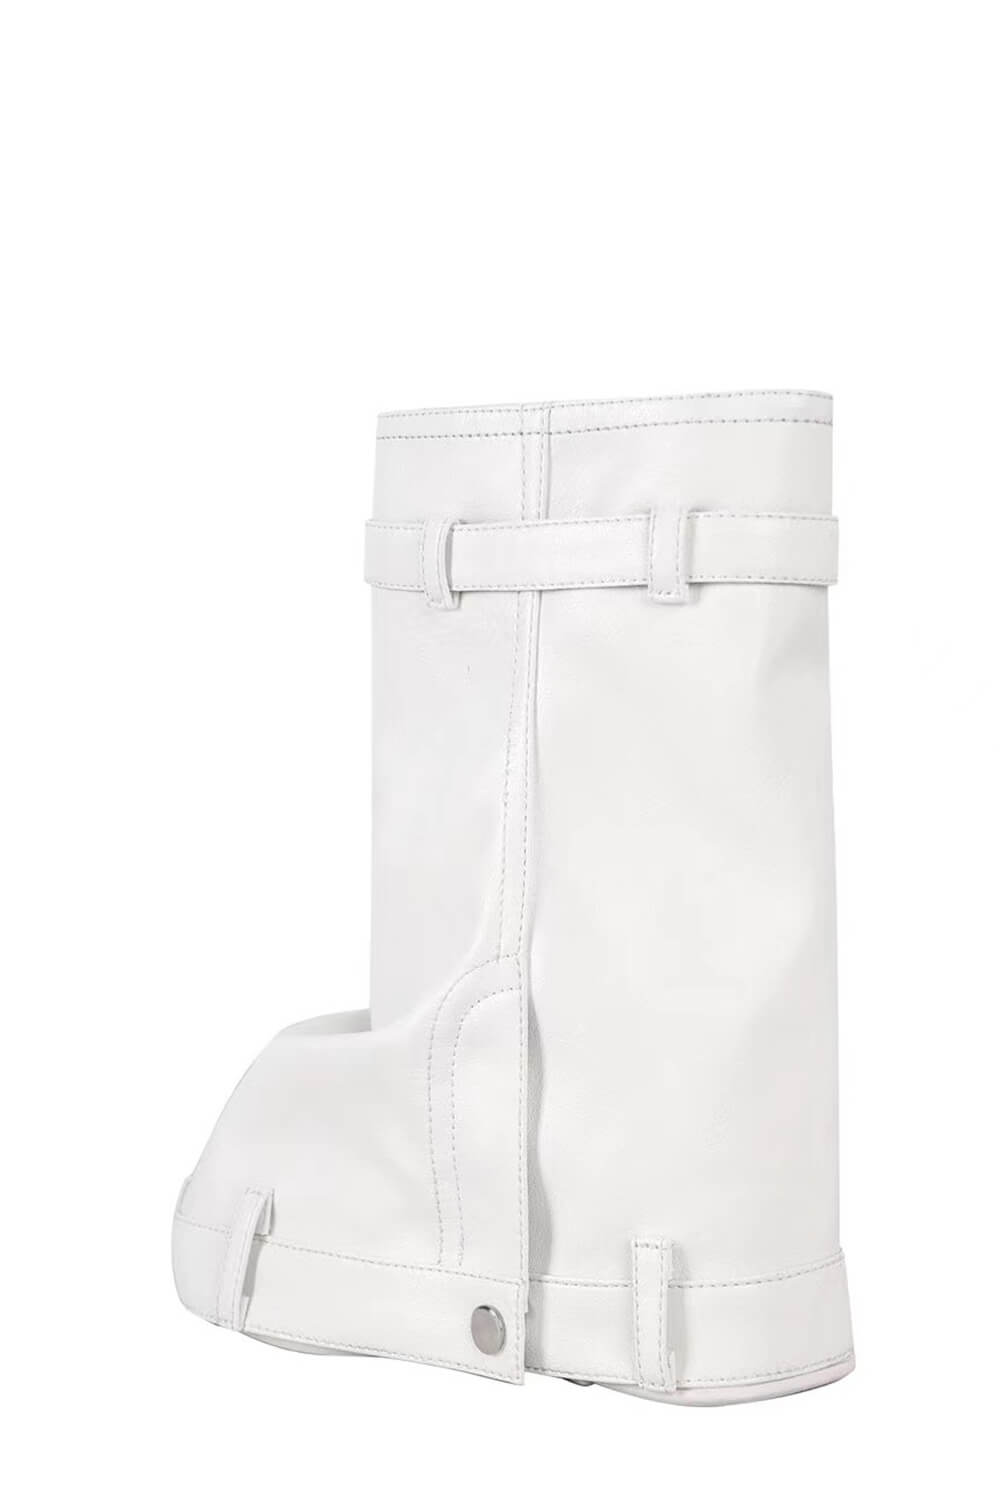 Wrapped Faux Leather Padlock Detail Folded Wedge Heel Mid Calf Chunky Biker Boots - White